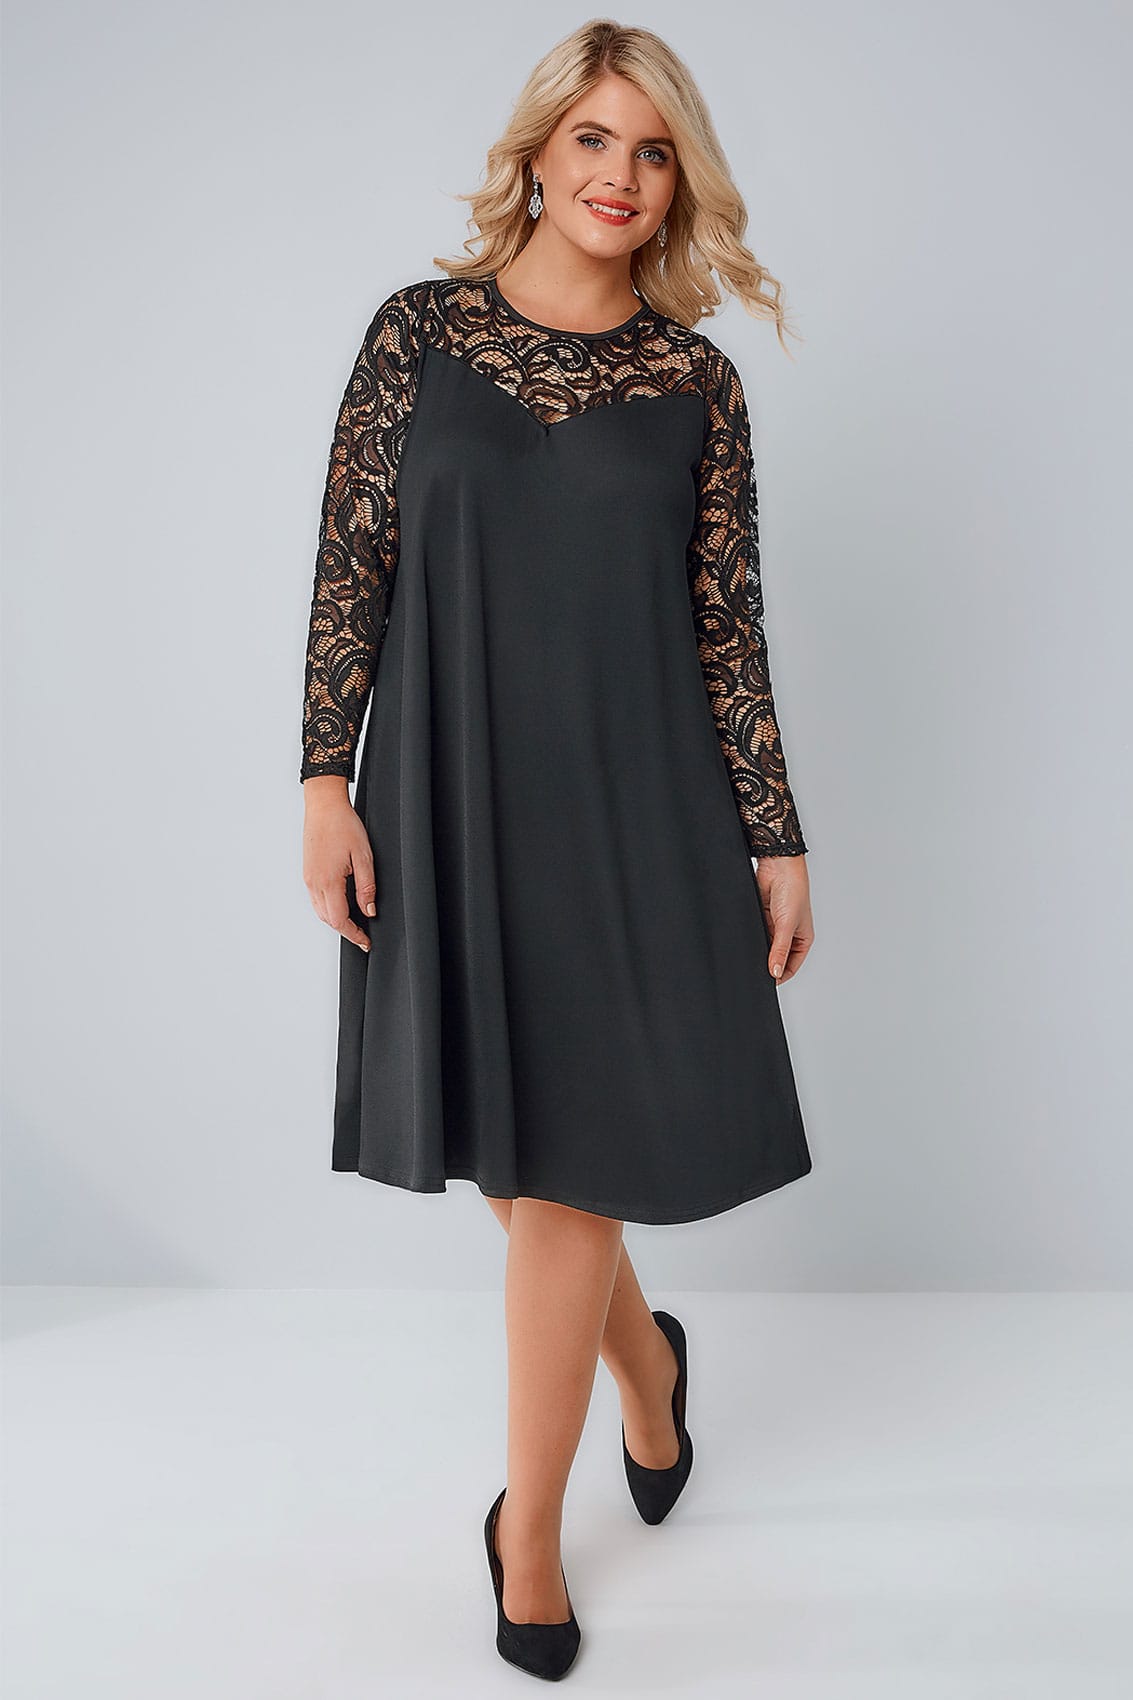 Black Lace & Crepe Mix Swing Dress With Sweetheart Neckline Plus Size ...